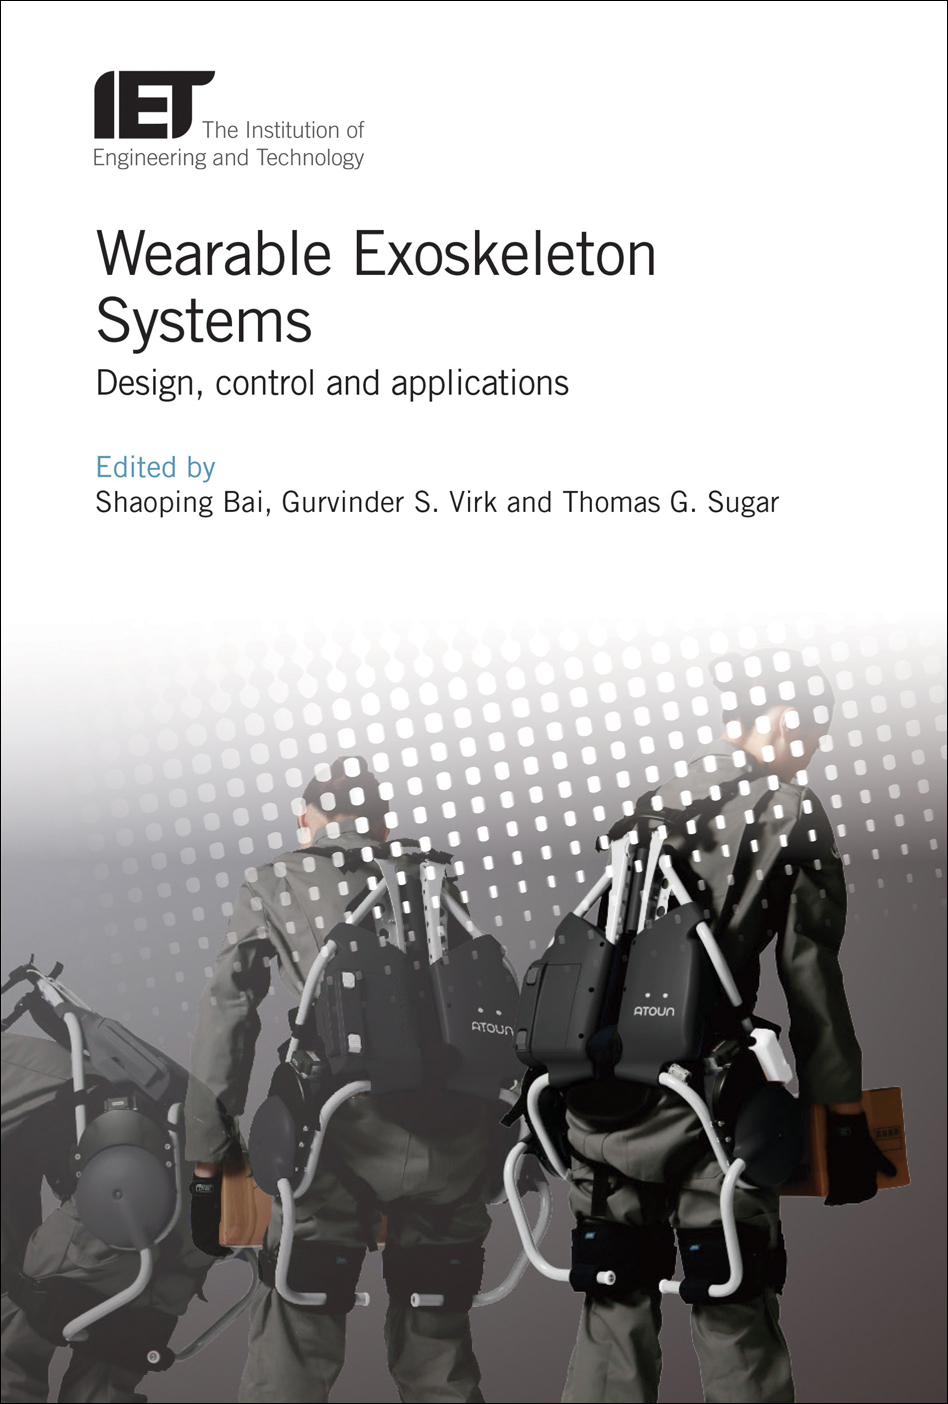 Wearable Exoskeleton Systems, Design, control and applications